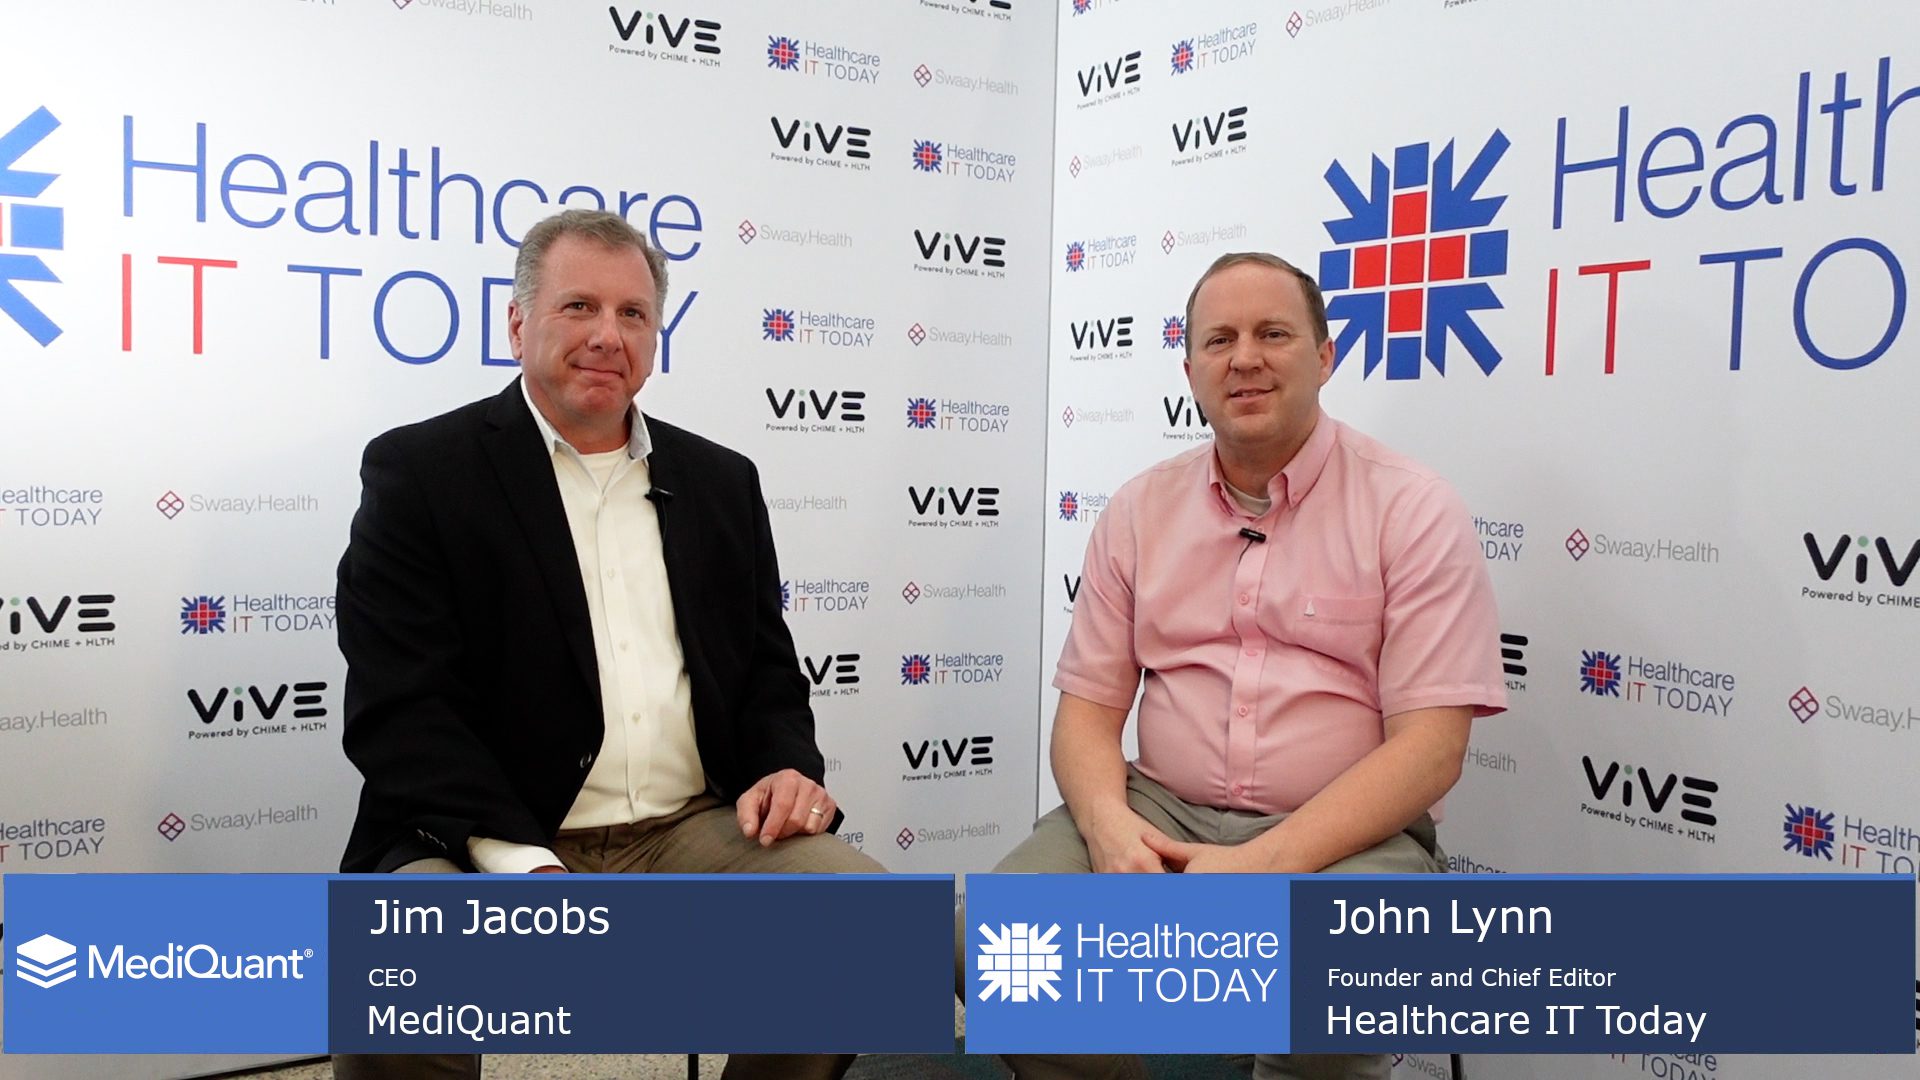 MediQuant Aims at “One Patient, One Record” | Healthcare IT Today